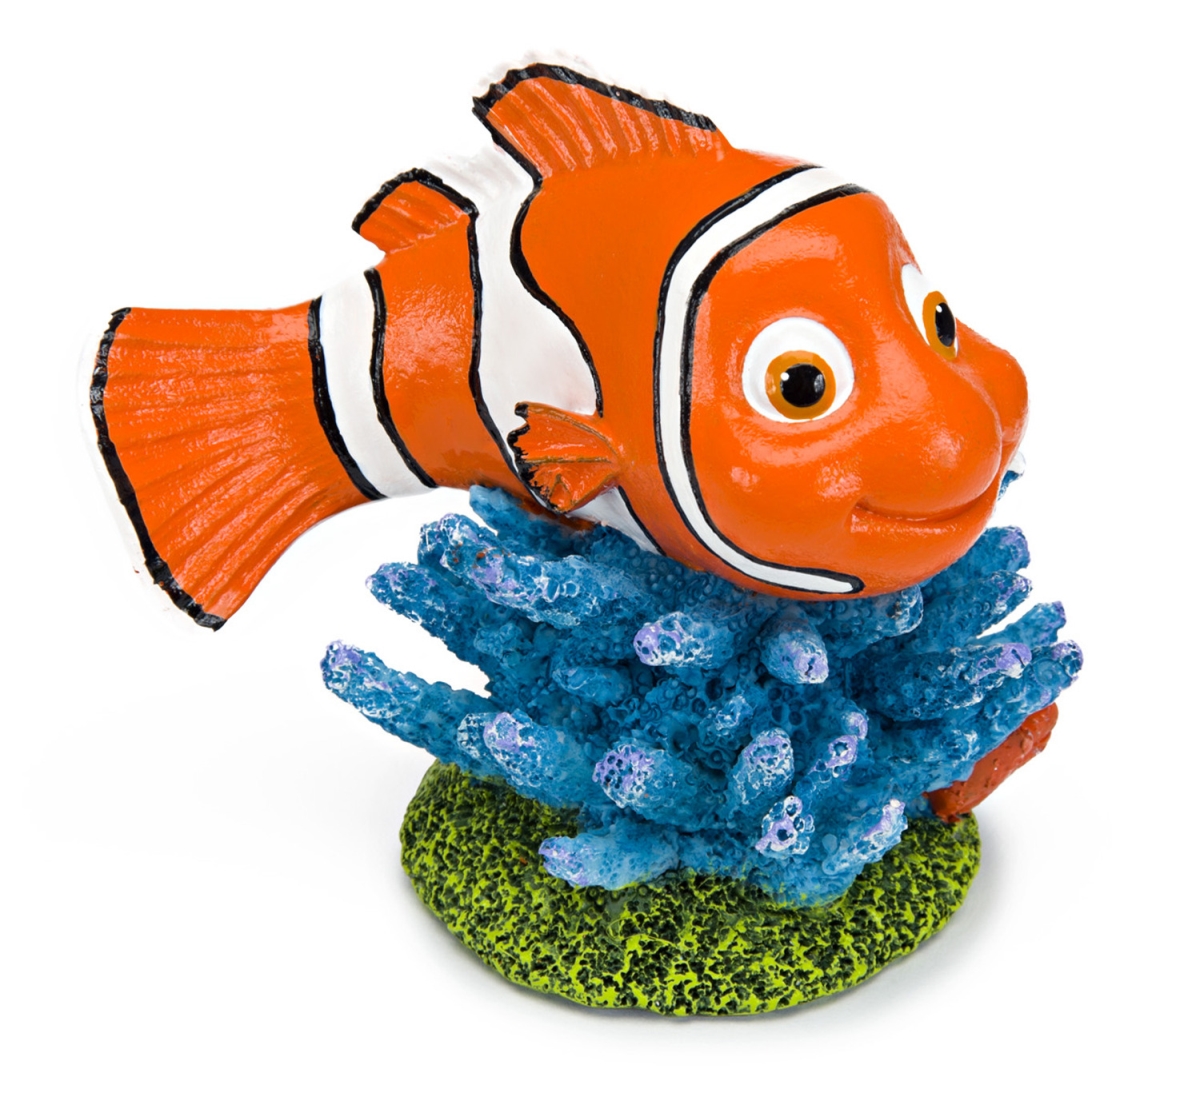 Penn Plax Nmr21 Finding Nemo Resin Ornament For Aquariums, 3.5 In.